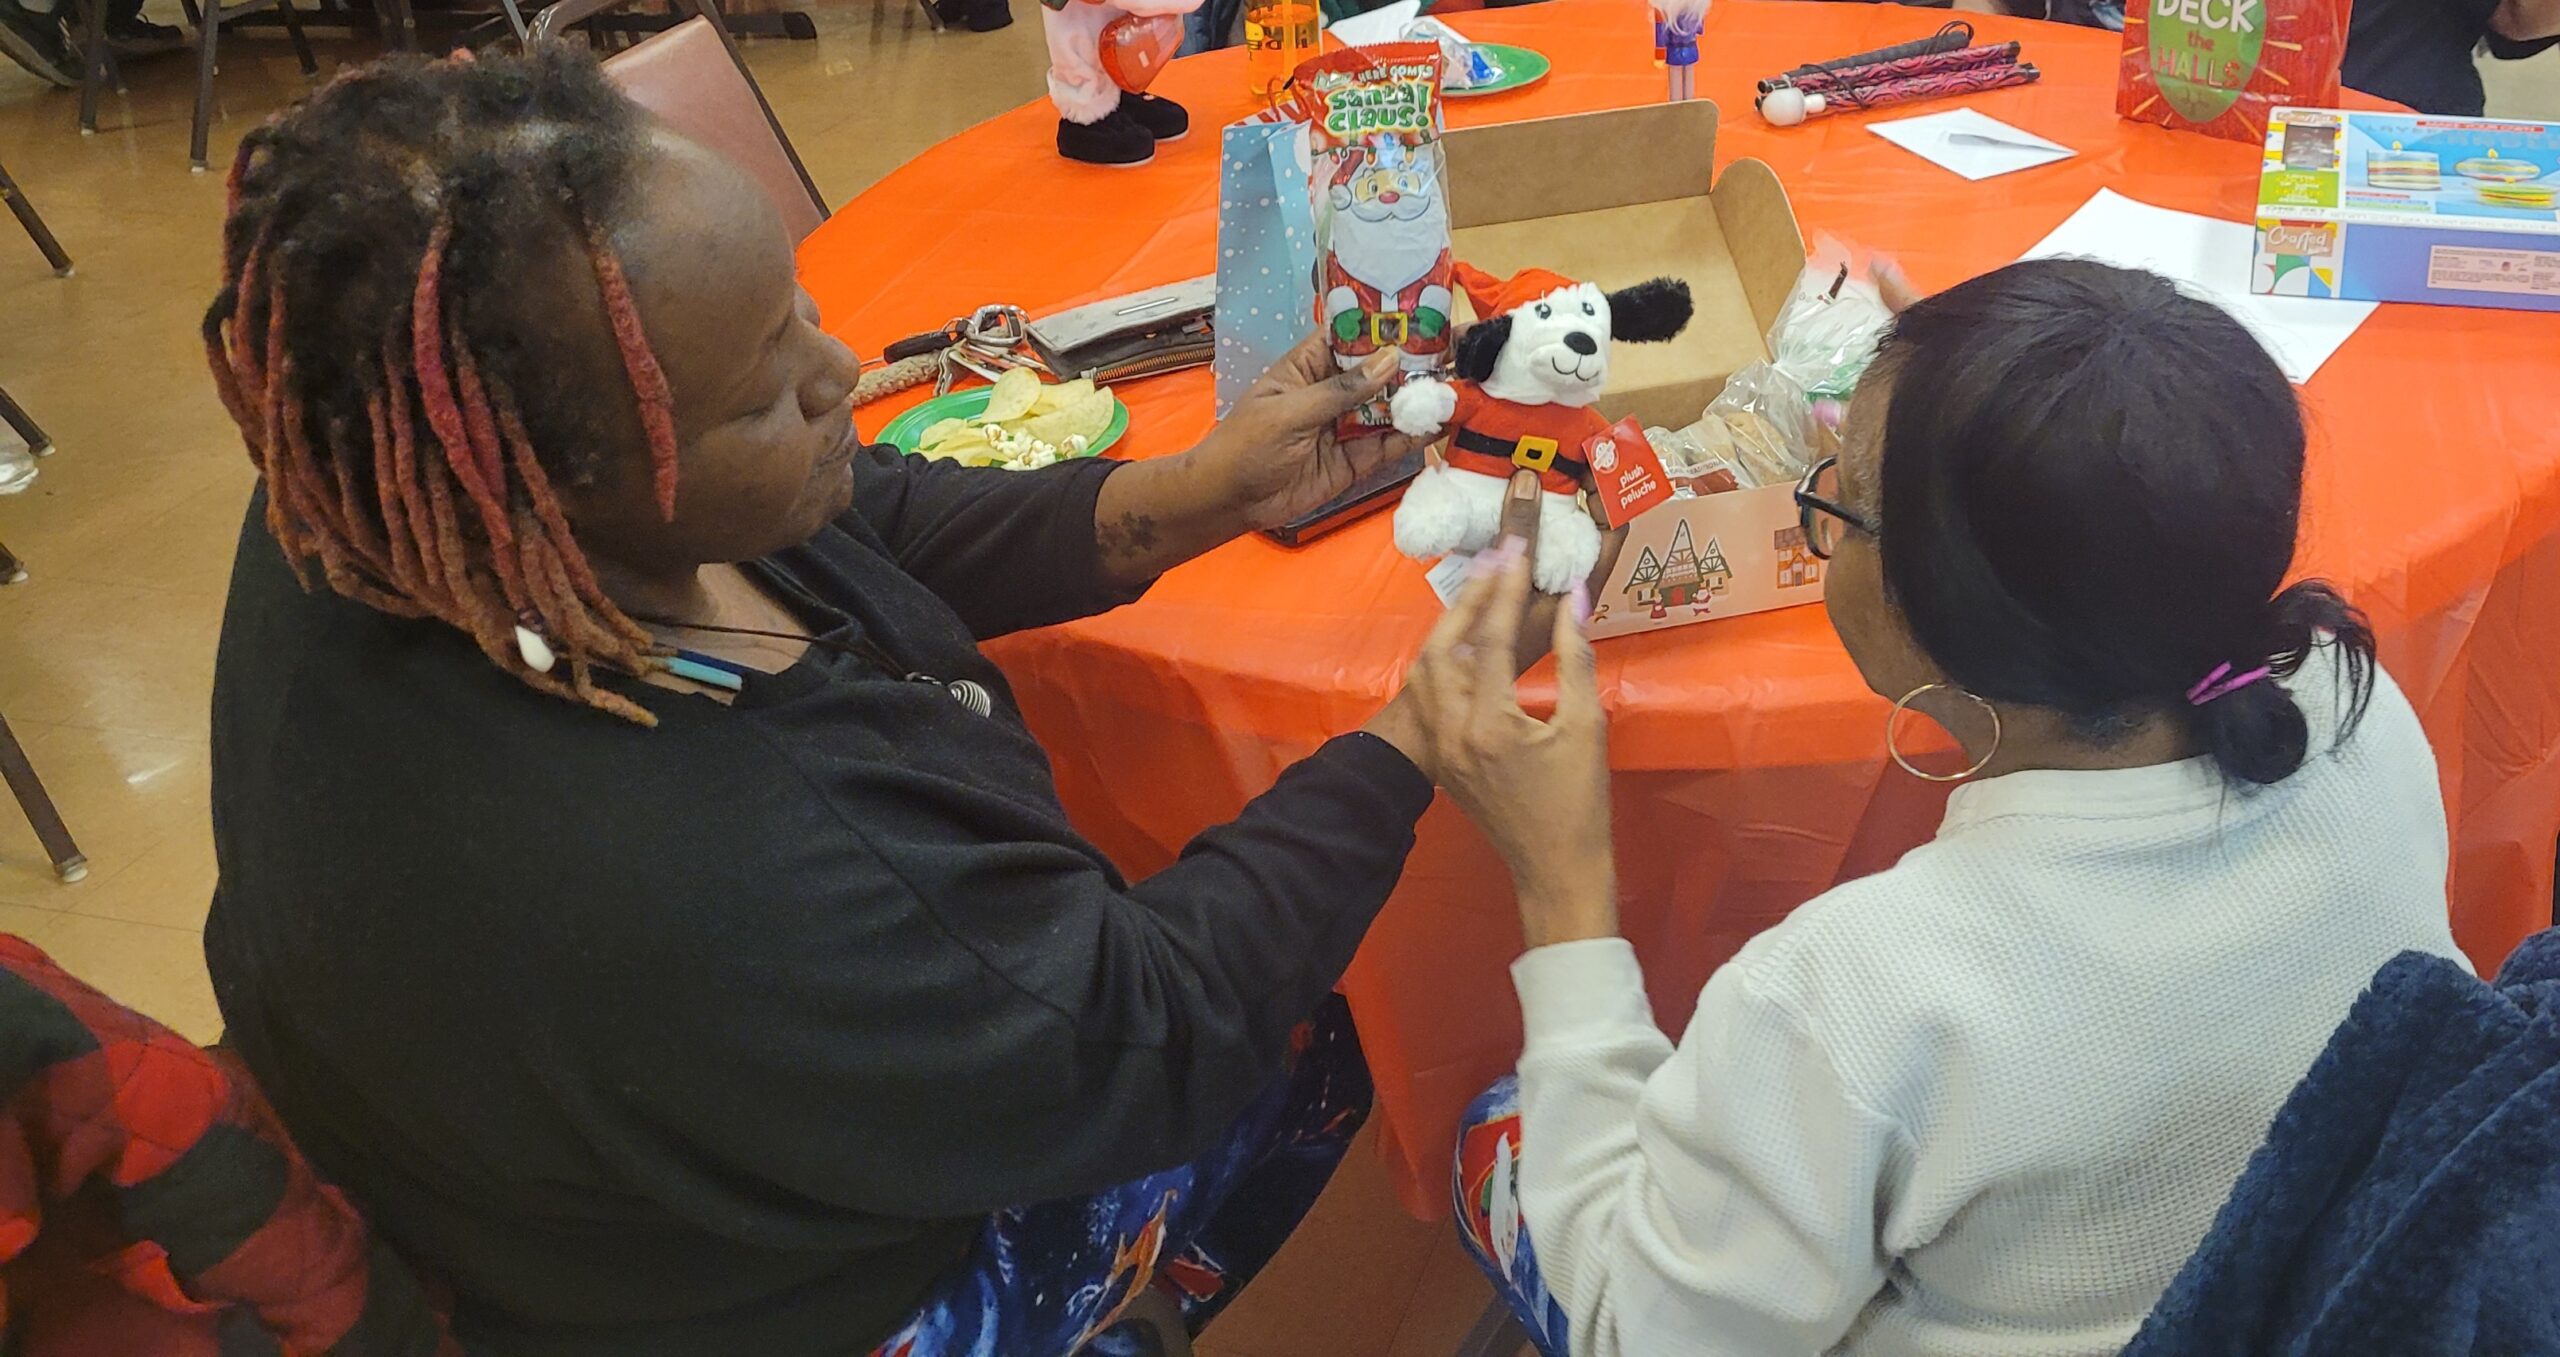 Seniors in Western Maryland getting to gether to do an arts and crafts project for the holidays.